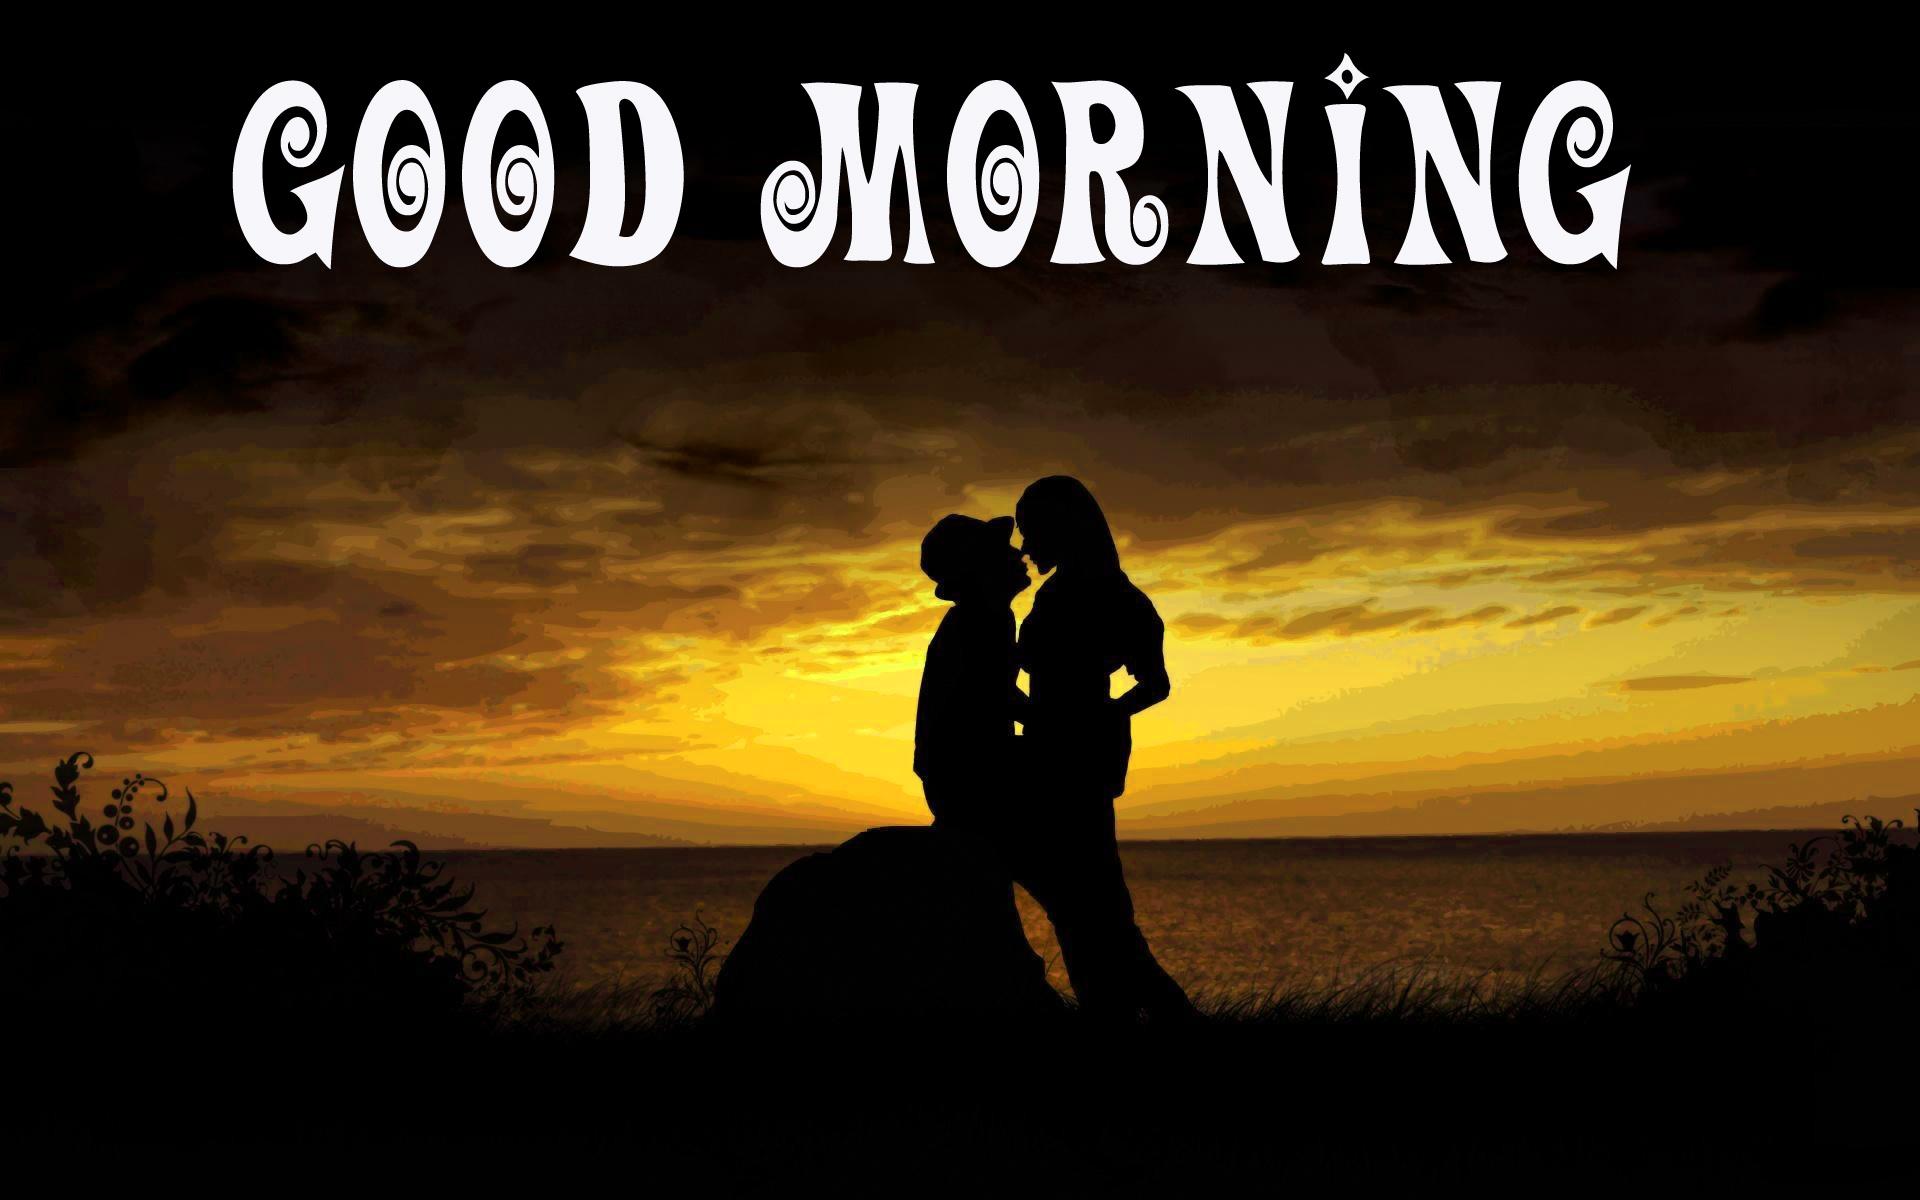 Romantic Good Morning Image Wallpapers Download